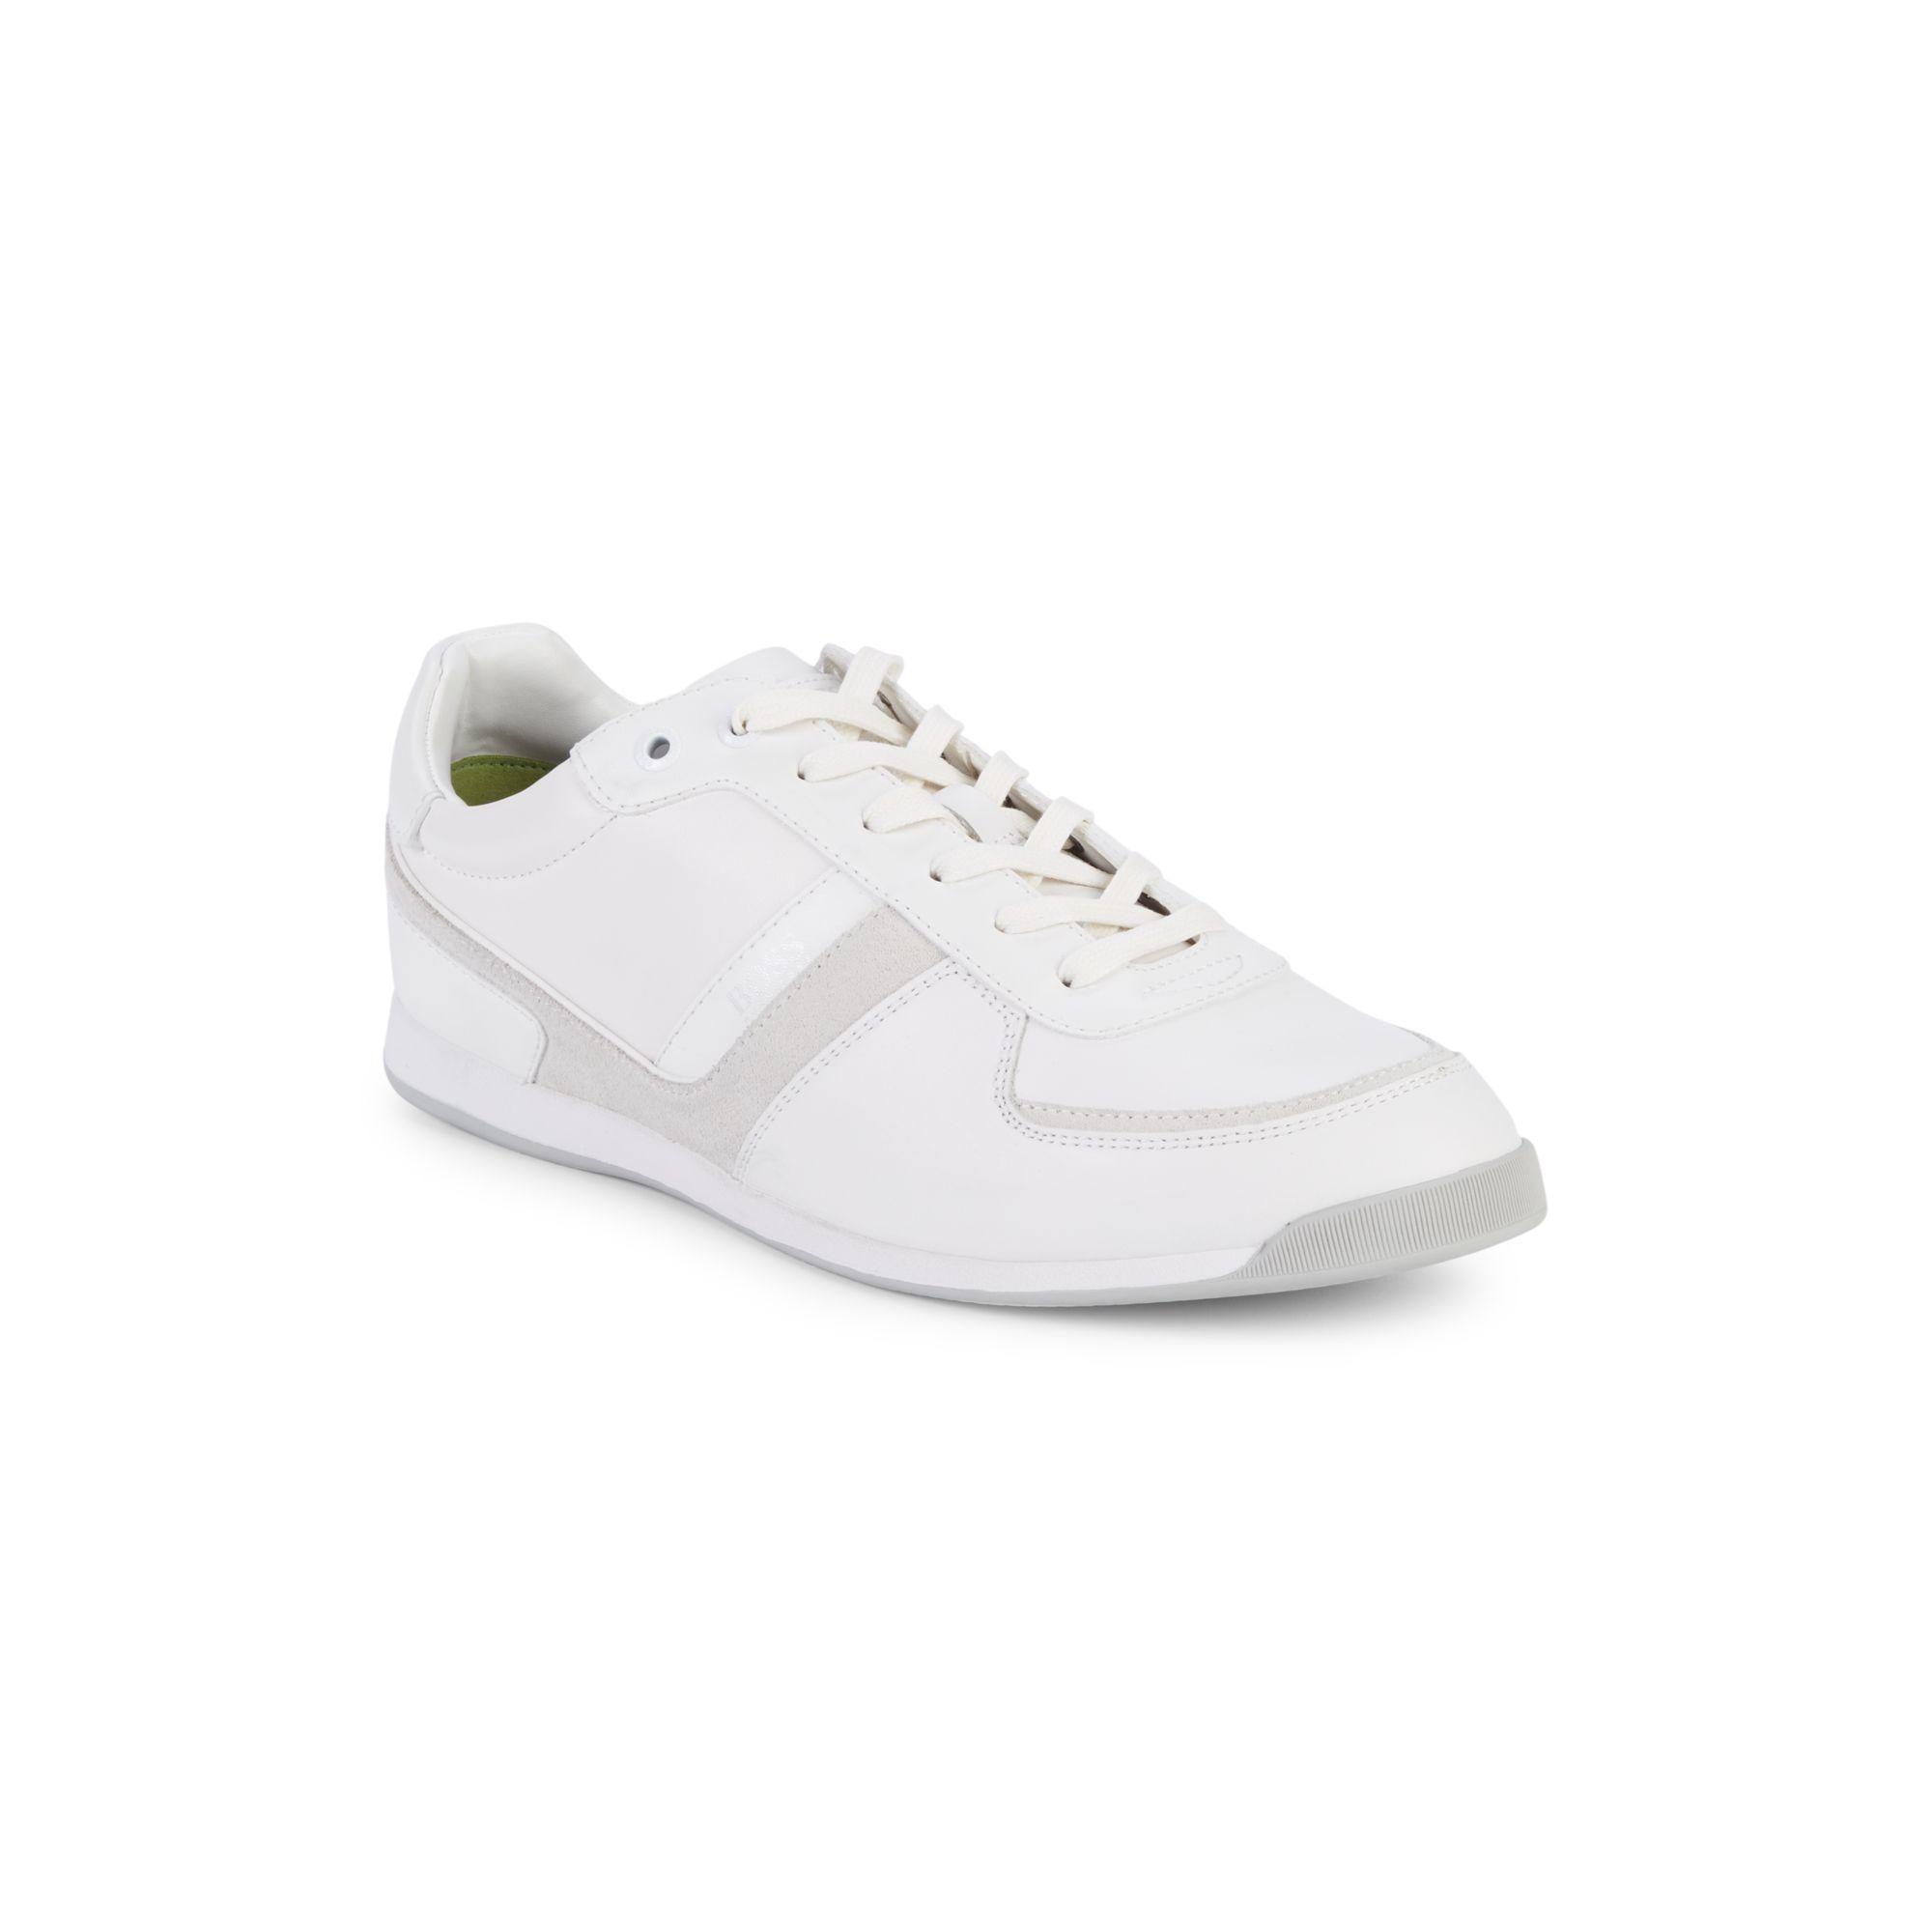 BOSS by Hugo Boss Leather Logo Lace-up Sneakers in White for Men - Lyst